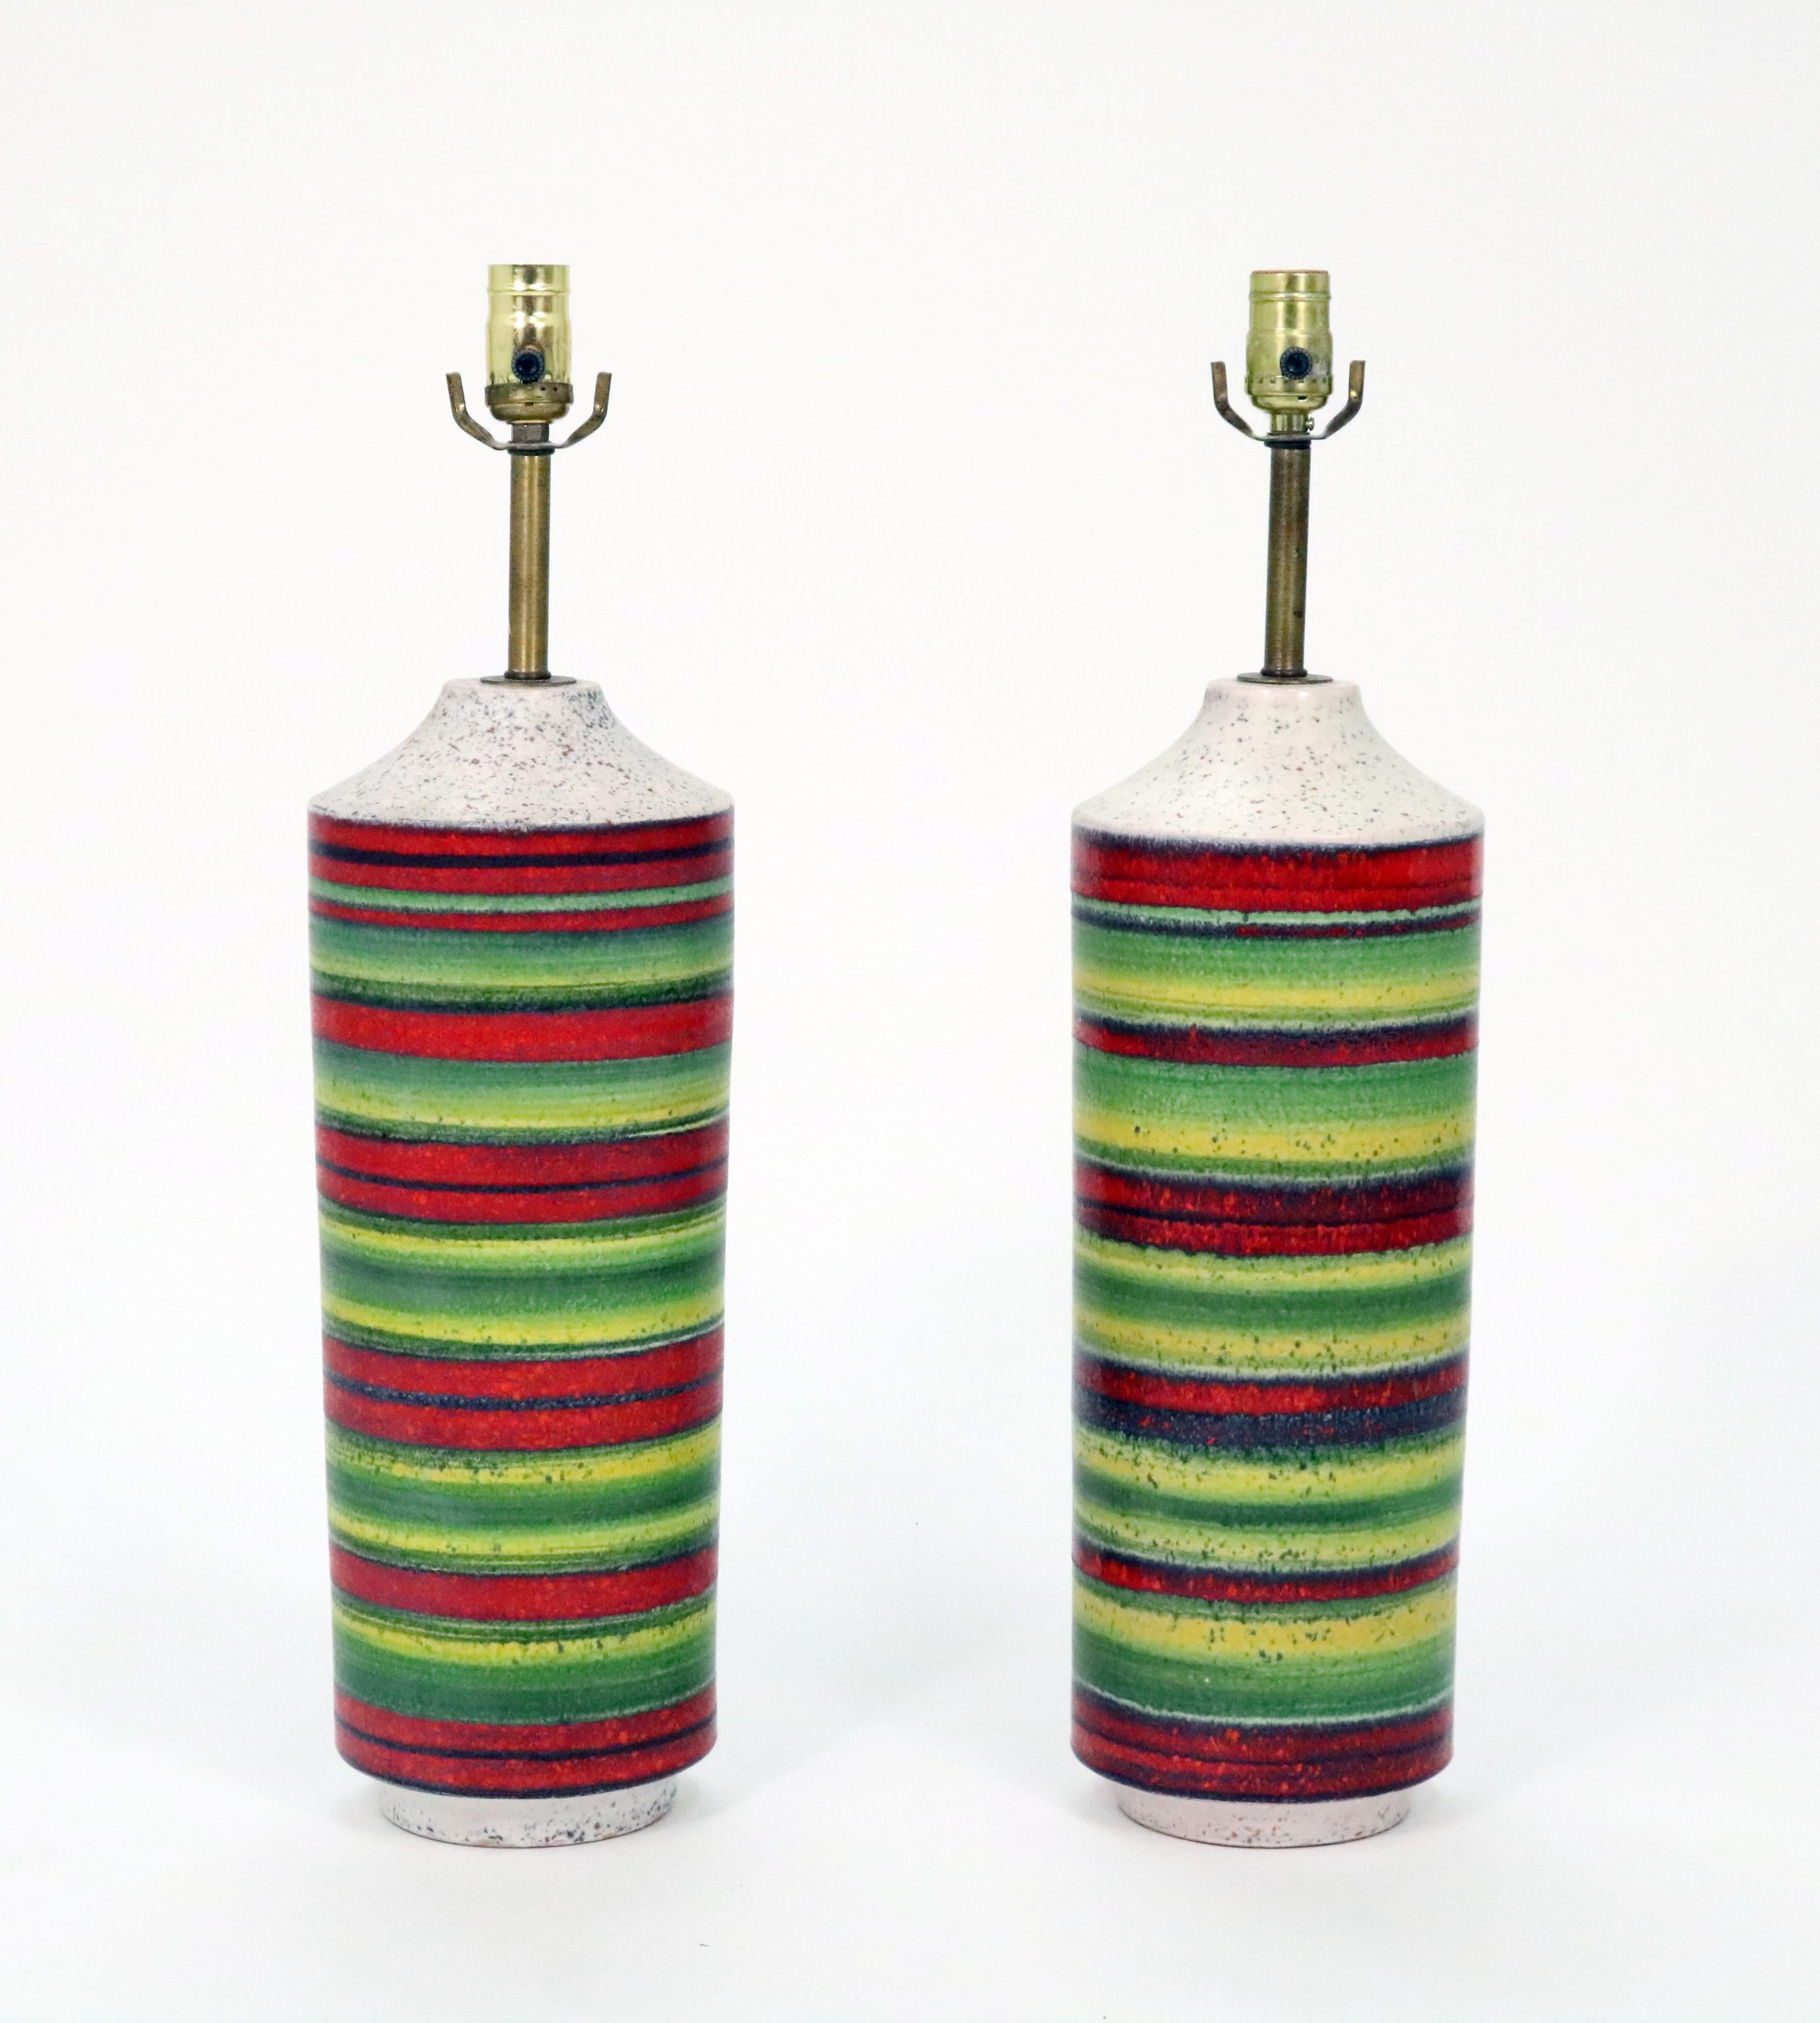 A gorgeous pair of mid-century Italian ceramic lamps by Alvino Bagni for Bagni Ceramiche, imported to the U.S. by Raymor. Brilliant reds, greens, yellows and black on a sand ivory palette.

Original shades. Can be shipped with or without